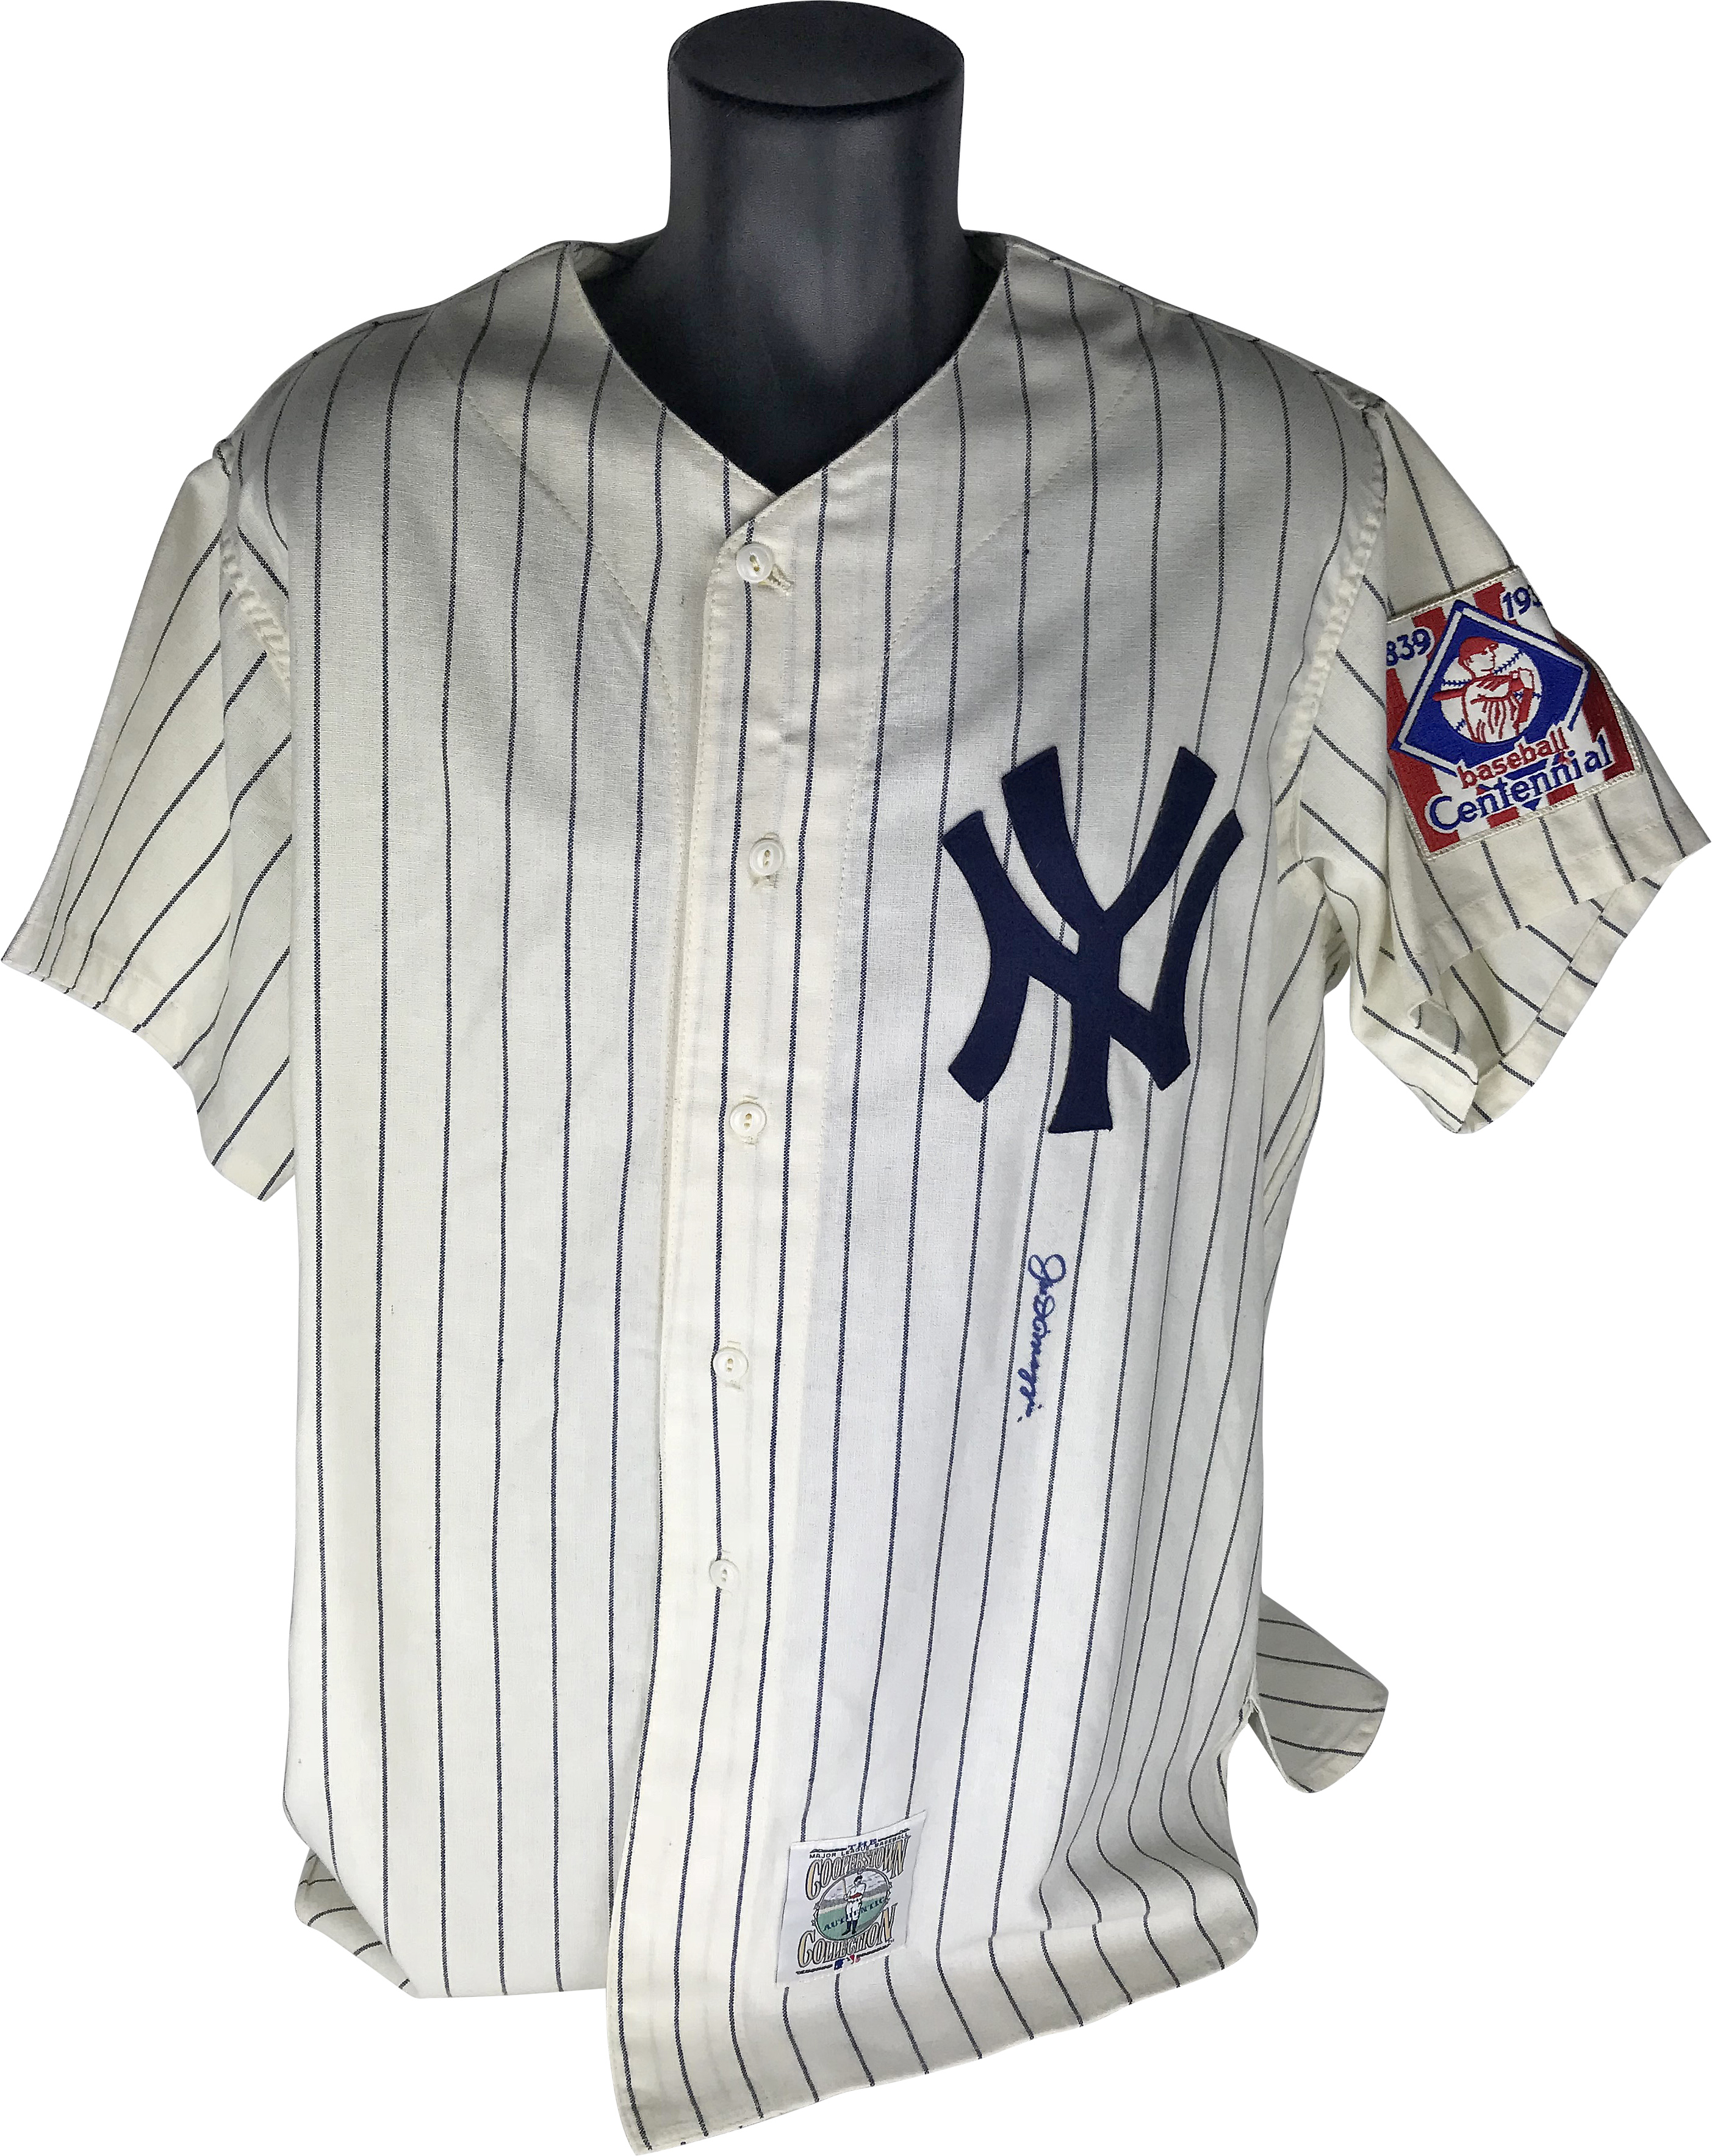 Sold at Auction: MITCHELL & NESS COOPERSTOWN JOE DIMAGGIO JERSEY